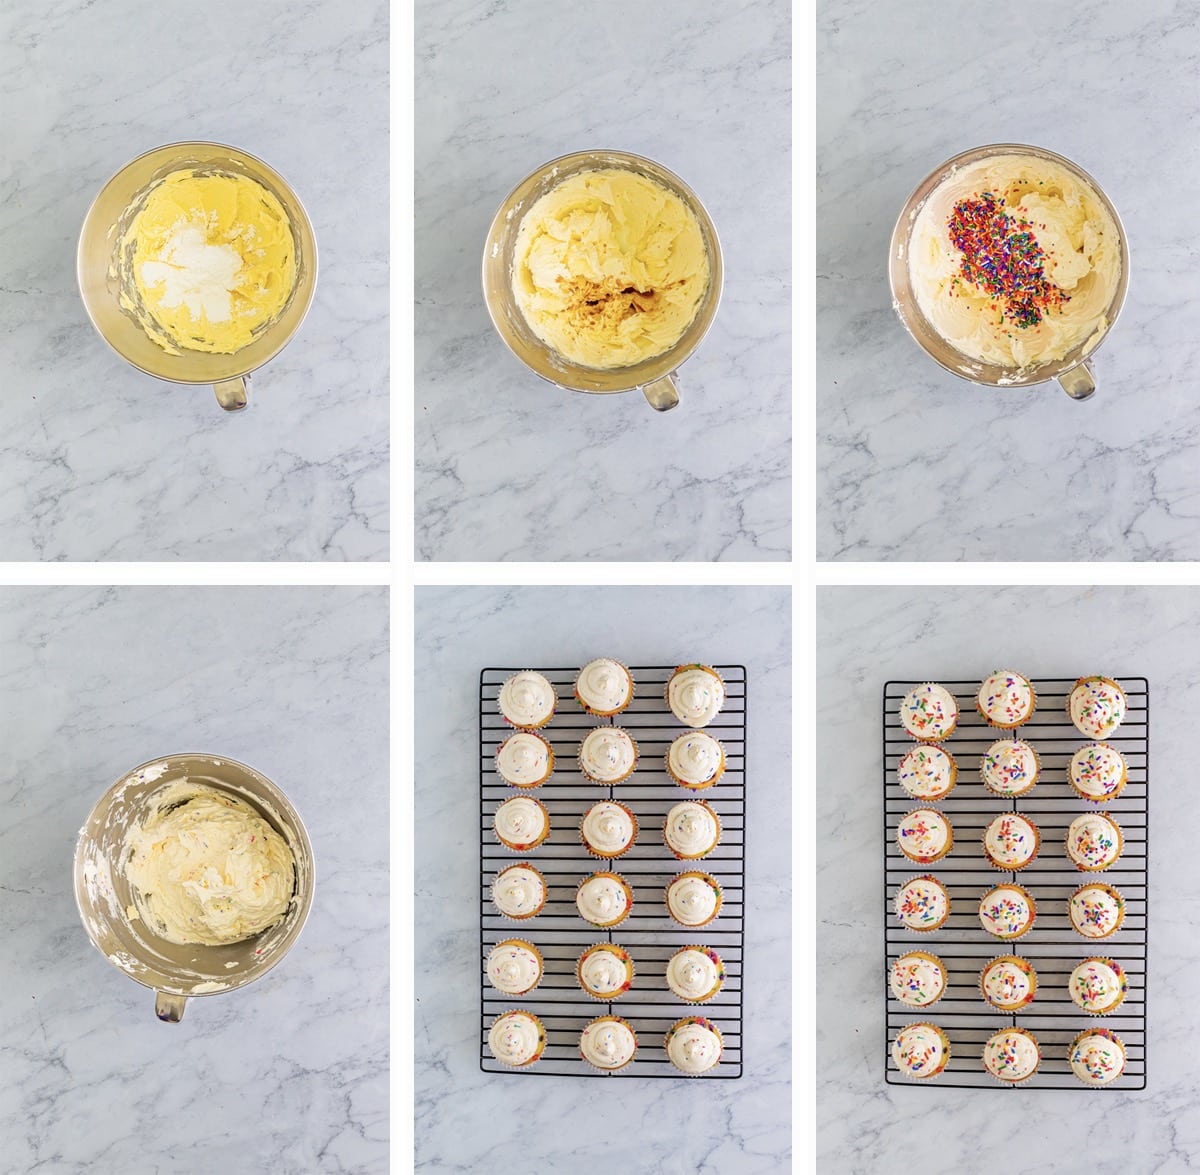 Overhead collage of images showing how to make the frosting and frost funfetti cupcakes